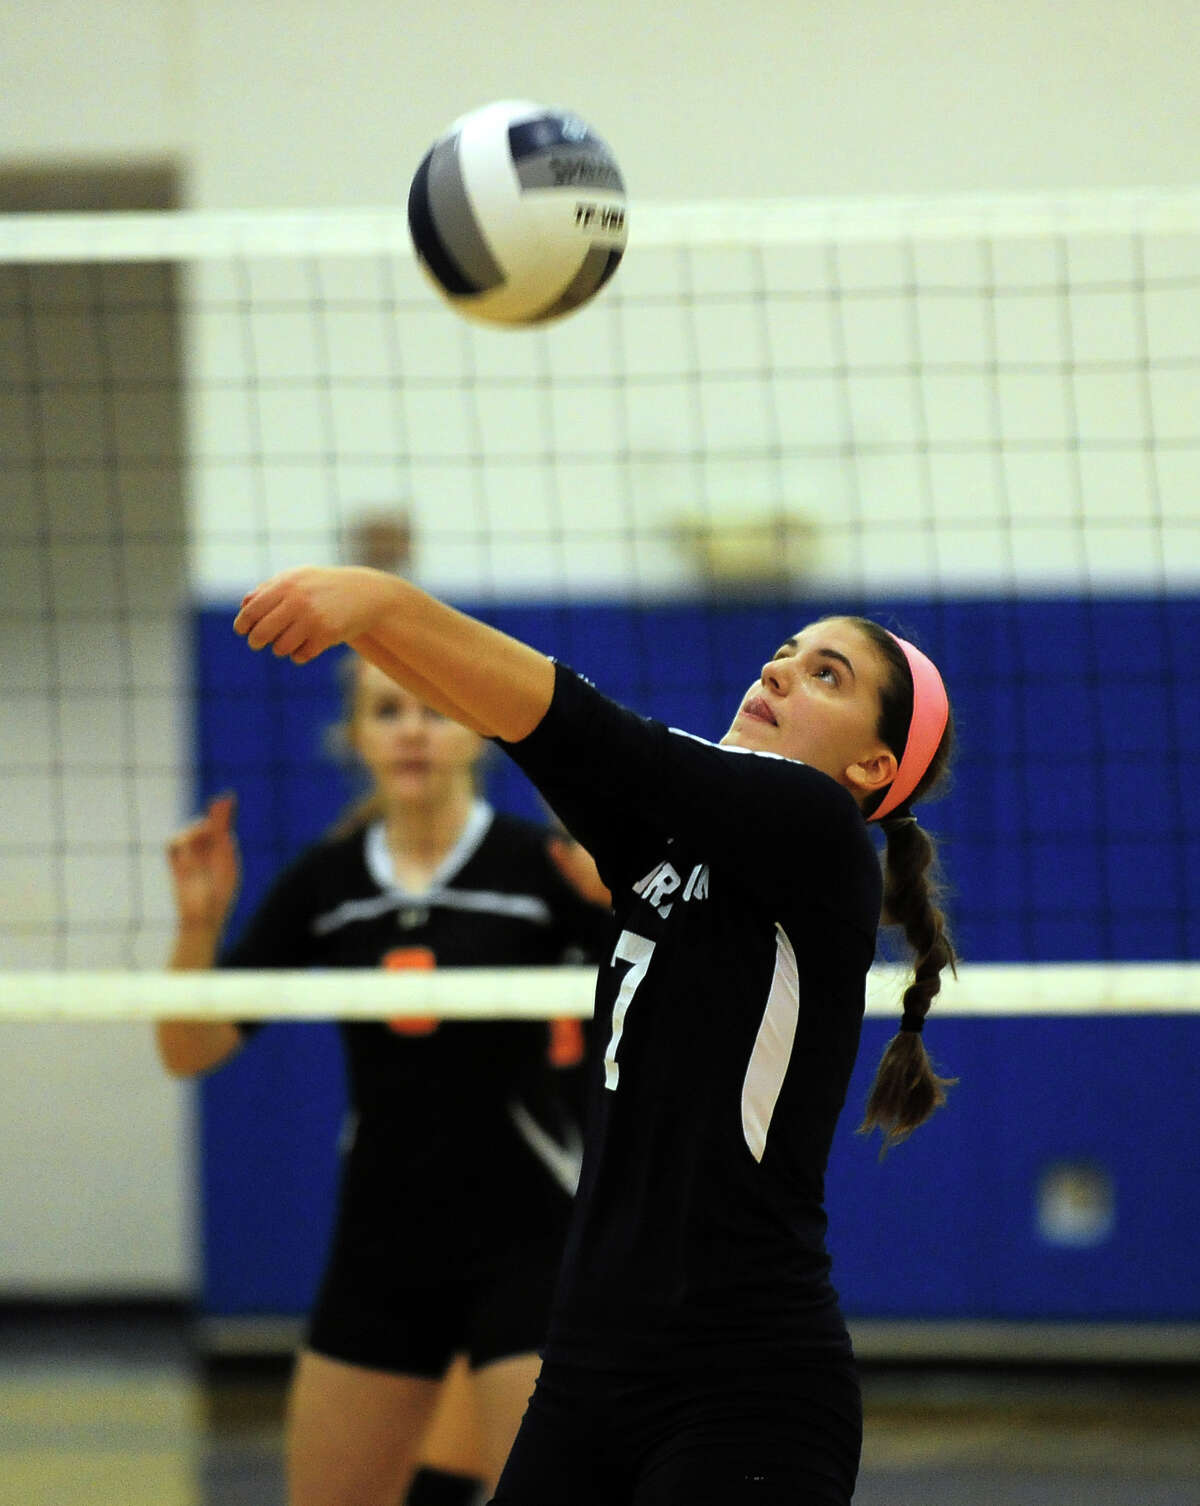 Lauralton Hall's Ally Grabler bumps the ball, during girls volleyball action against Shelton in Milford, Conn. on Wednesday October 15, 2014.